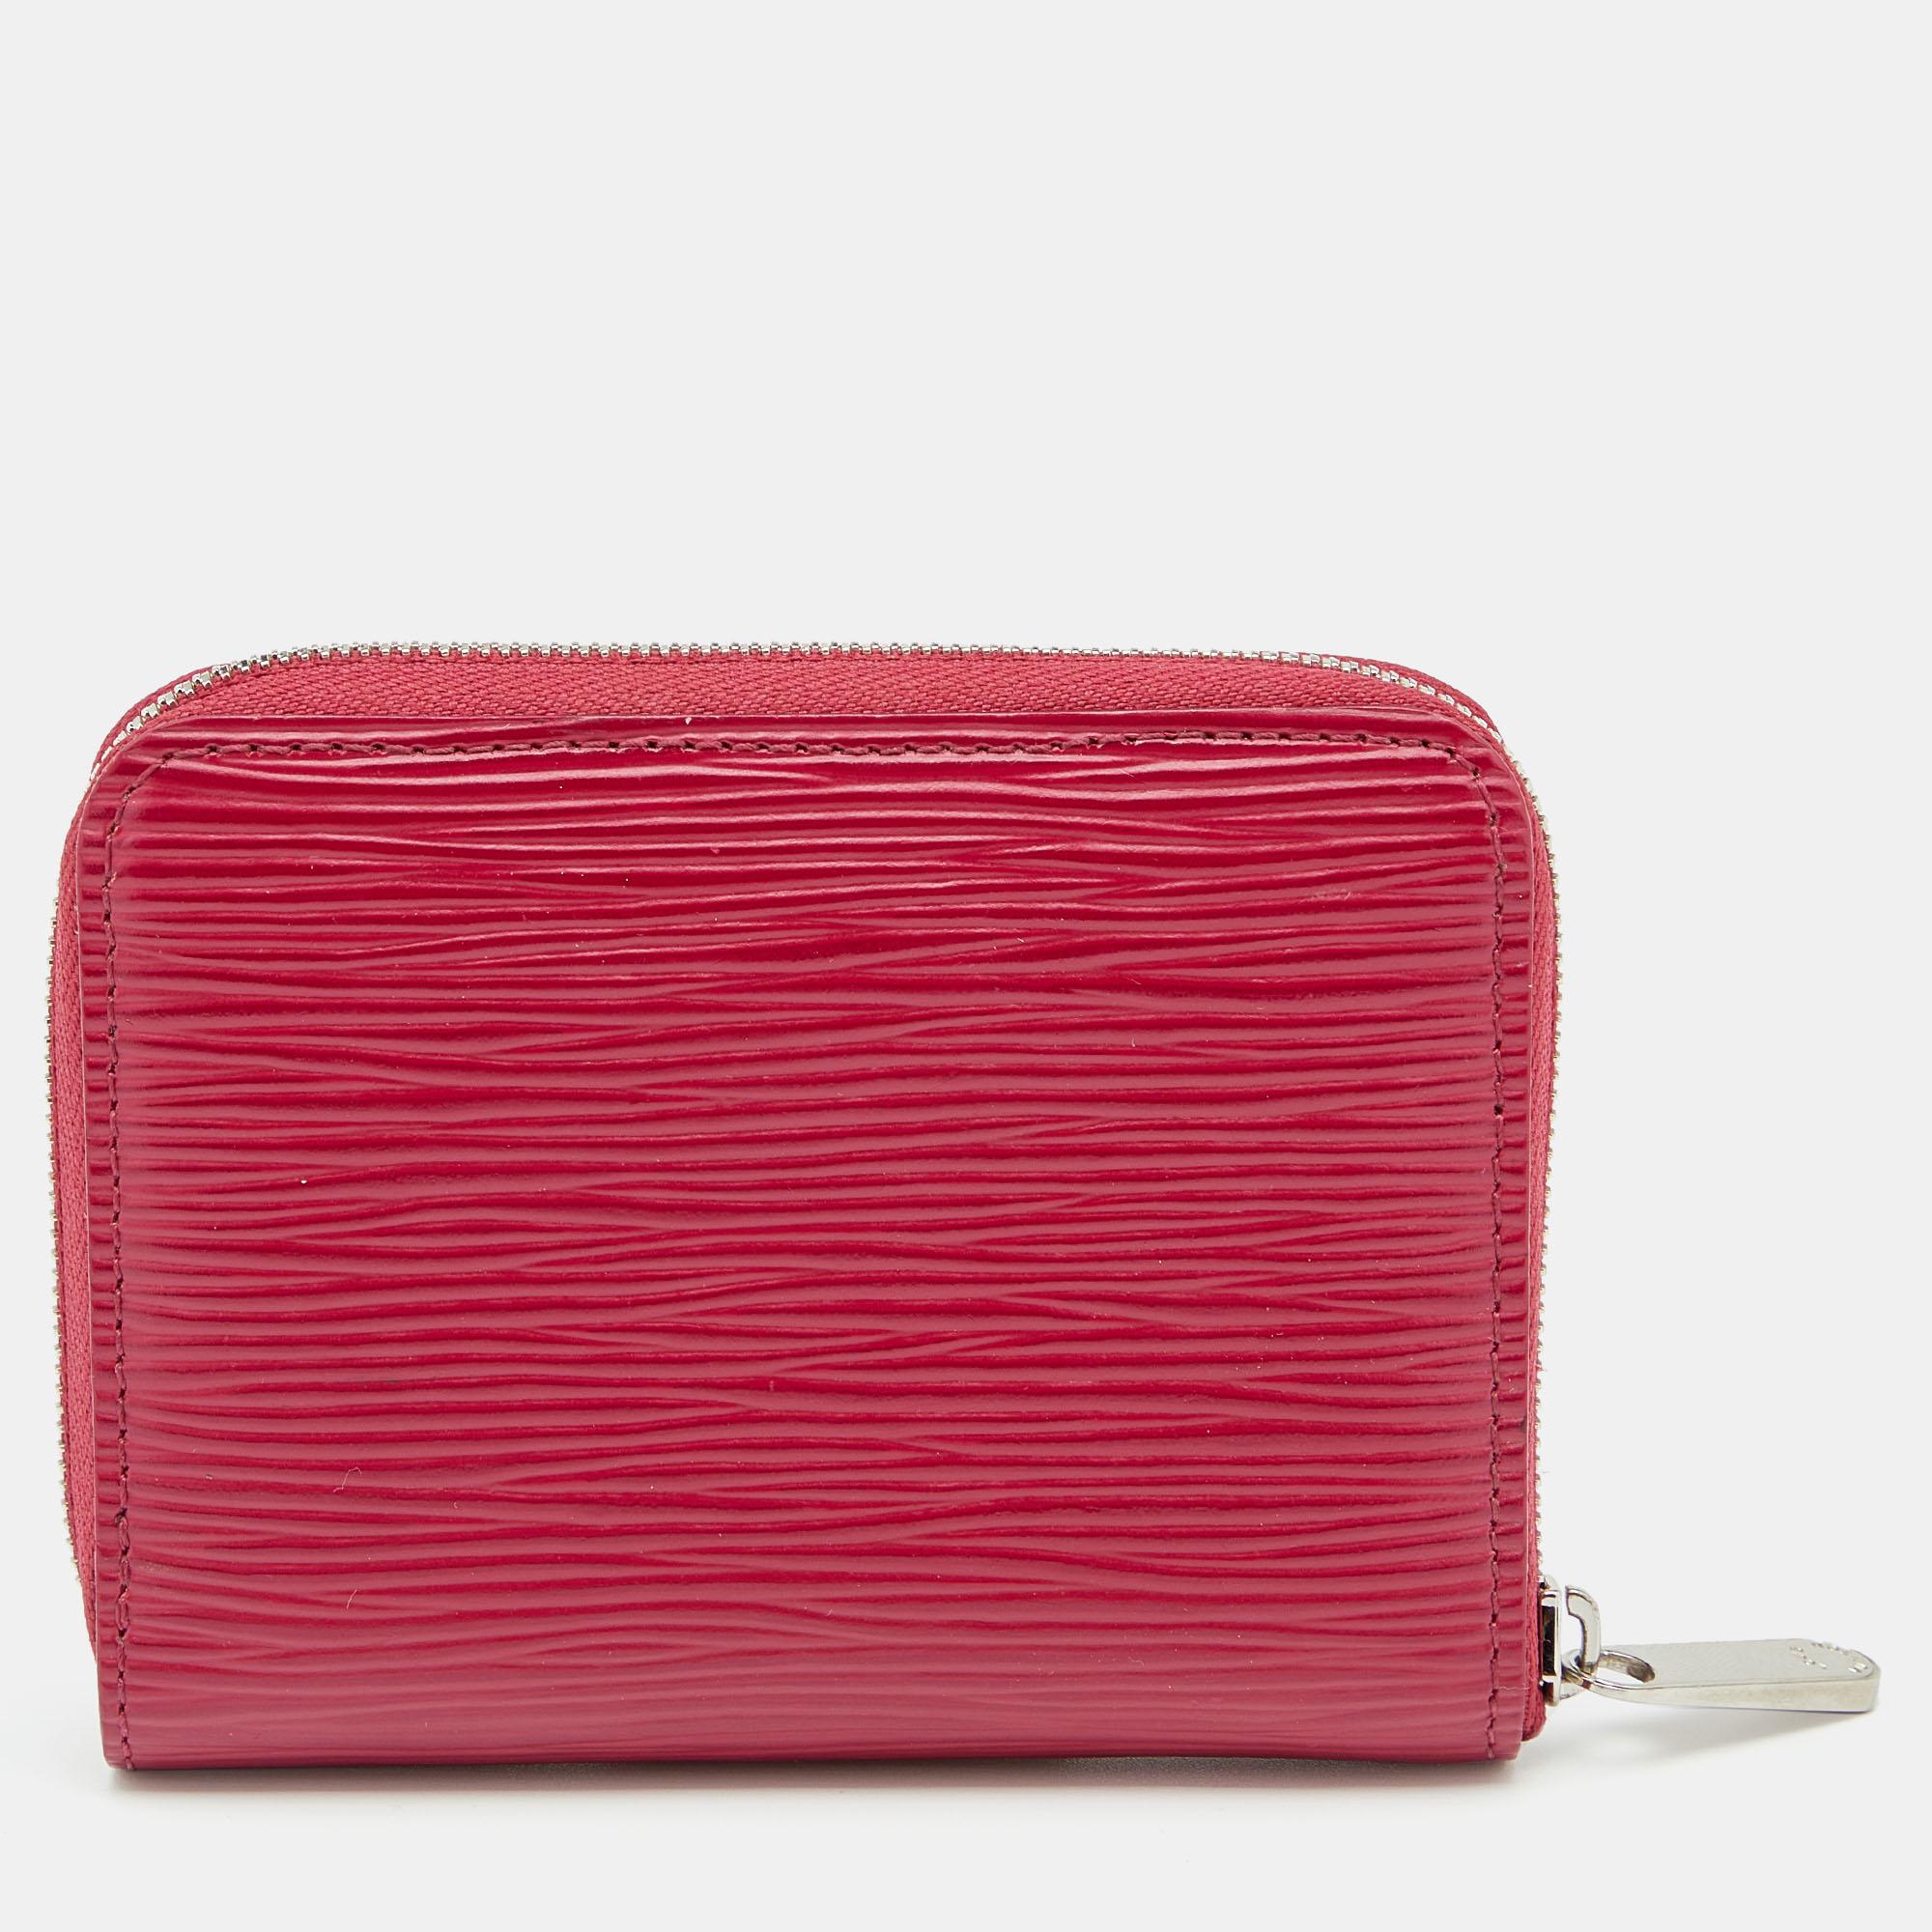 This Louis Vuitton Zippy coin purse is conveniently designed for everyday use. Crafted from fuchsia Epi leather, the purse has a zip closure that opens to reveal multiple slots for you to neatly arrange your cards and coins.